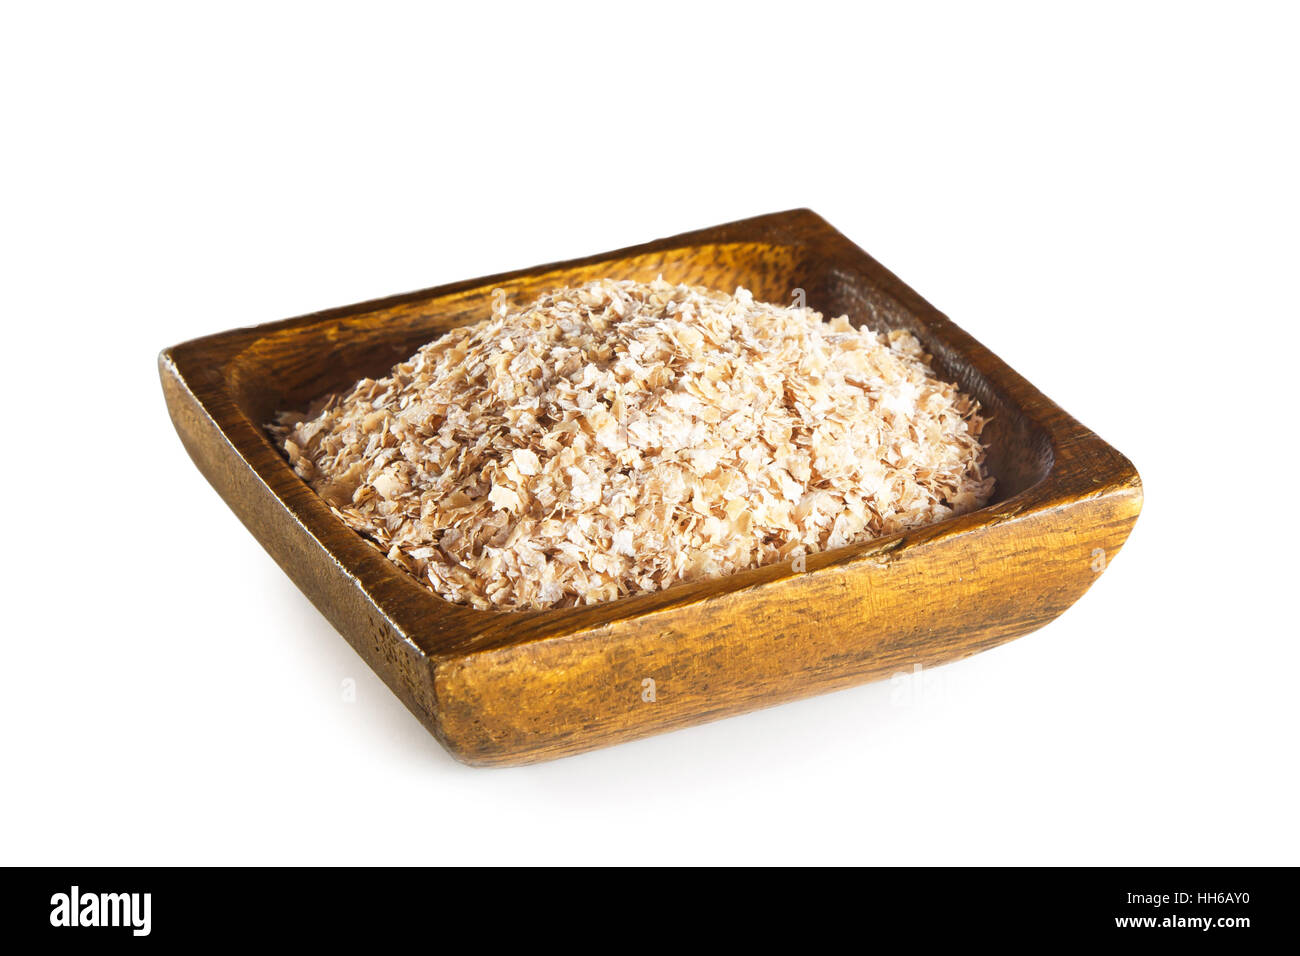 Wheat bran in wooden bowl isolated on white background Stock Photo